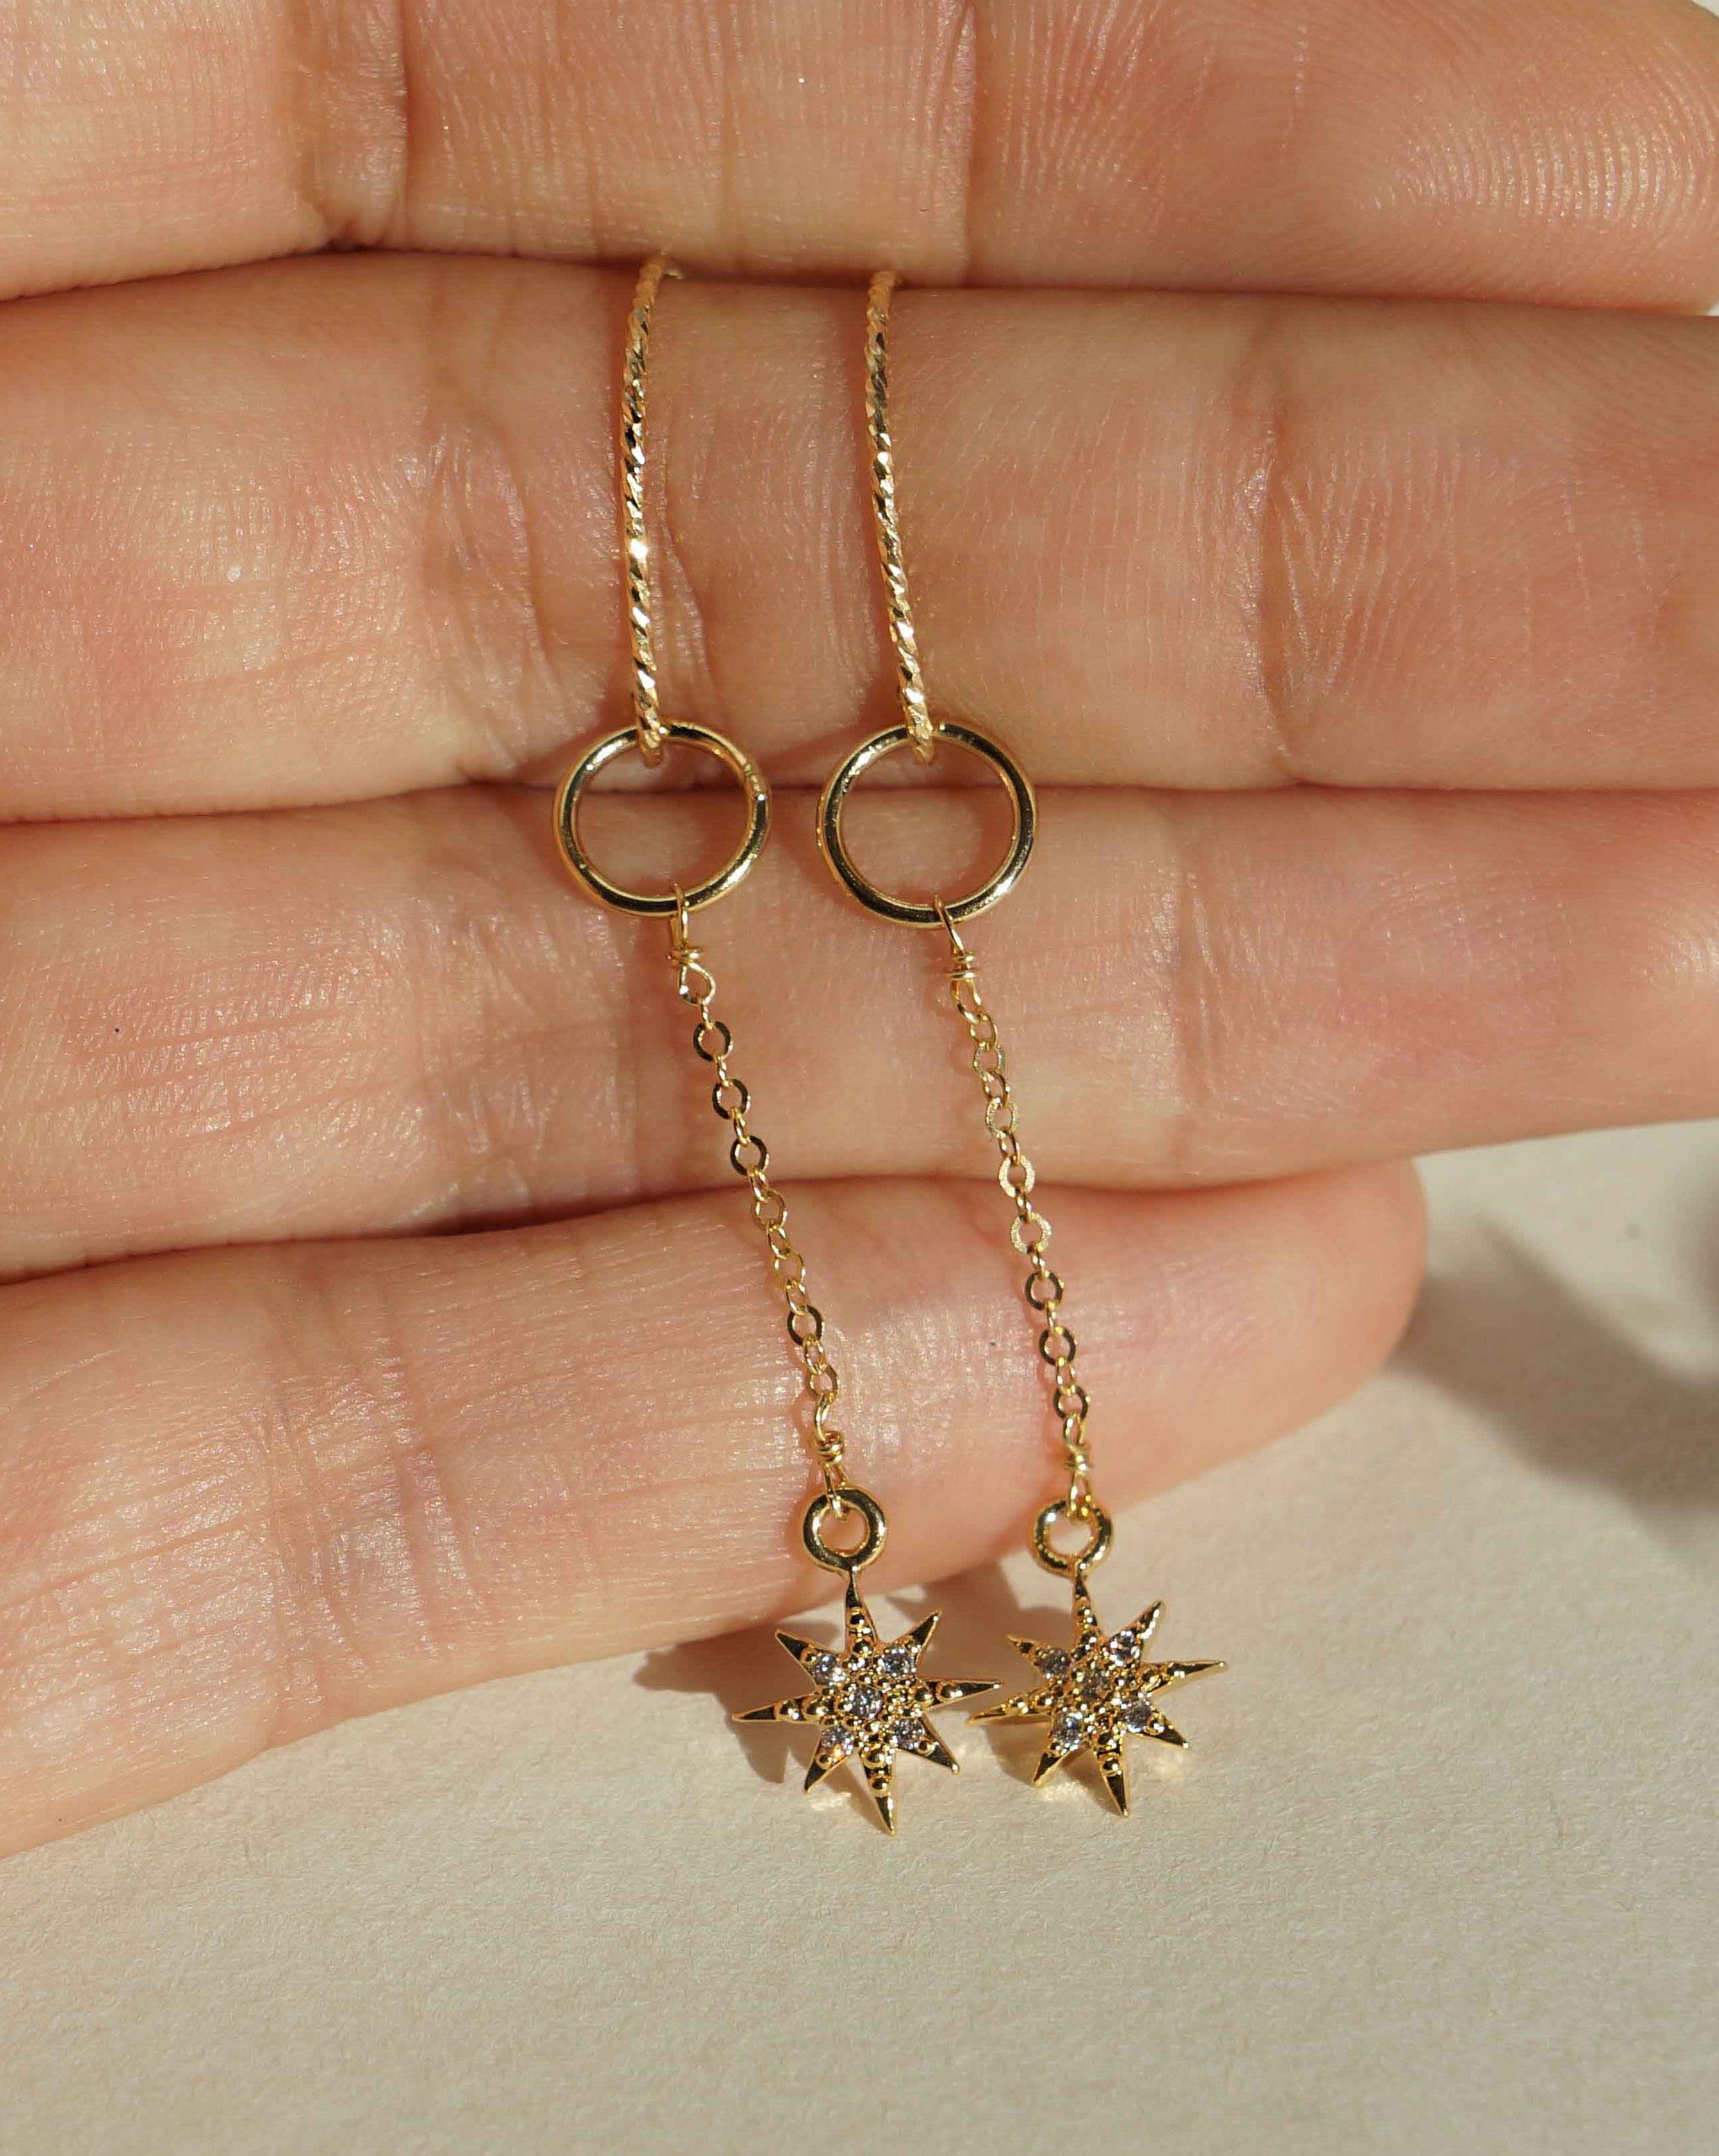 You Stardrop Earrings by KOZAKH. Diamond textured hook dangling earrings, crafted in 14K Gold Filled, featuring a Cubic Zirconia encrusted 8 point star charm.